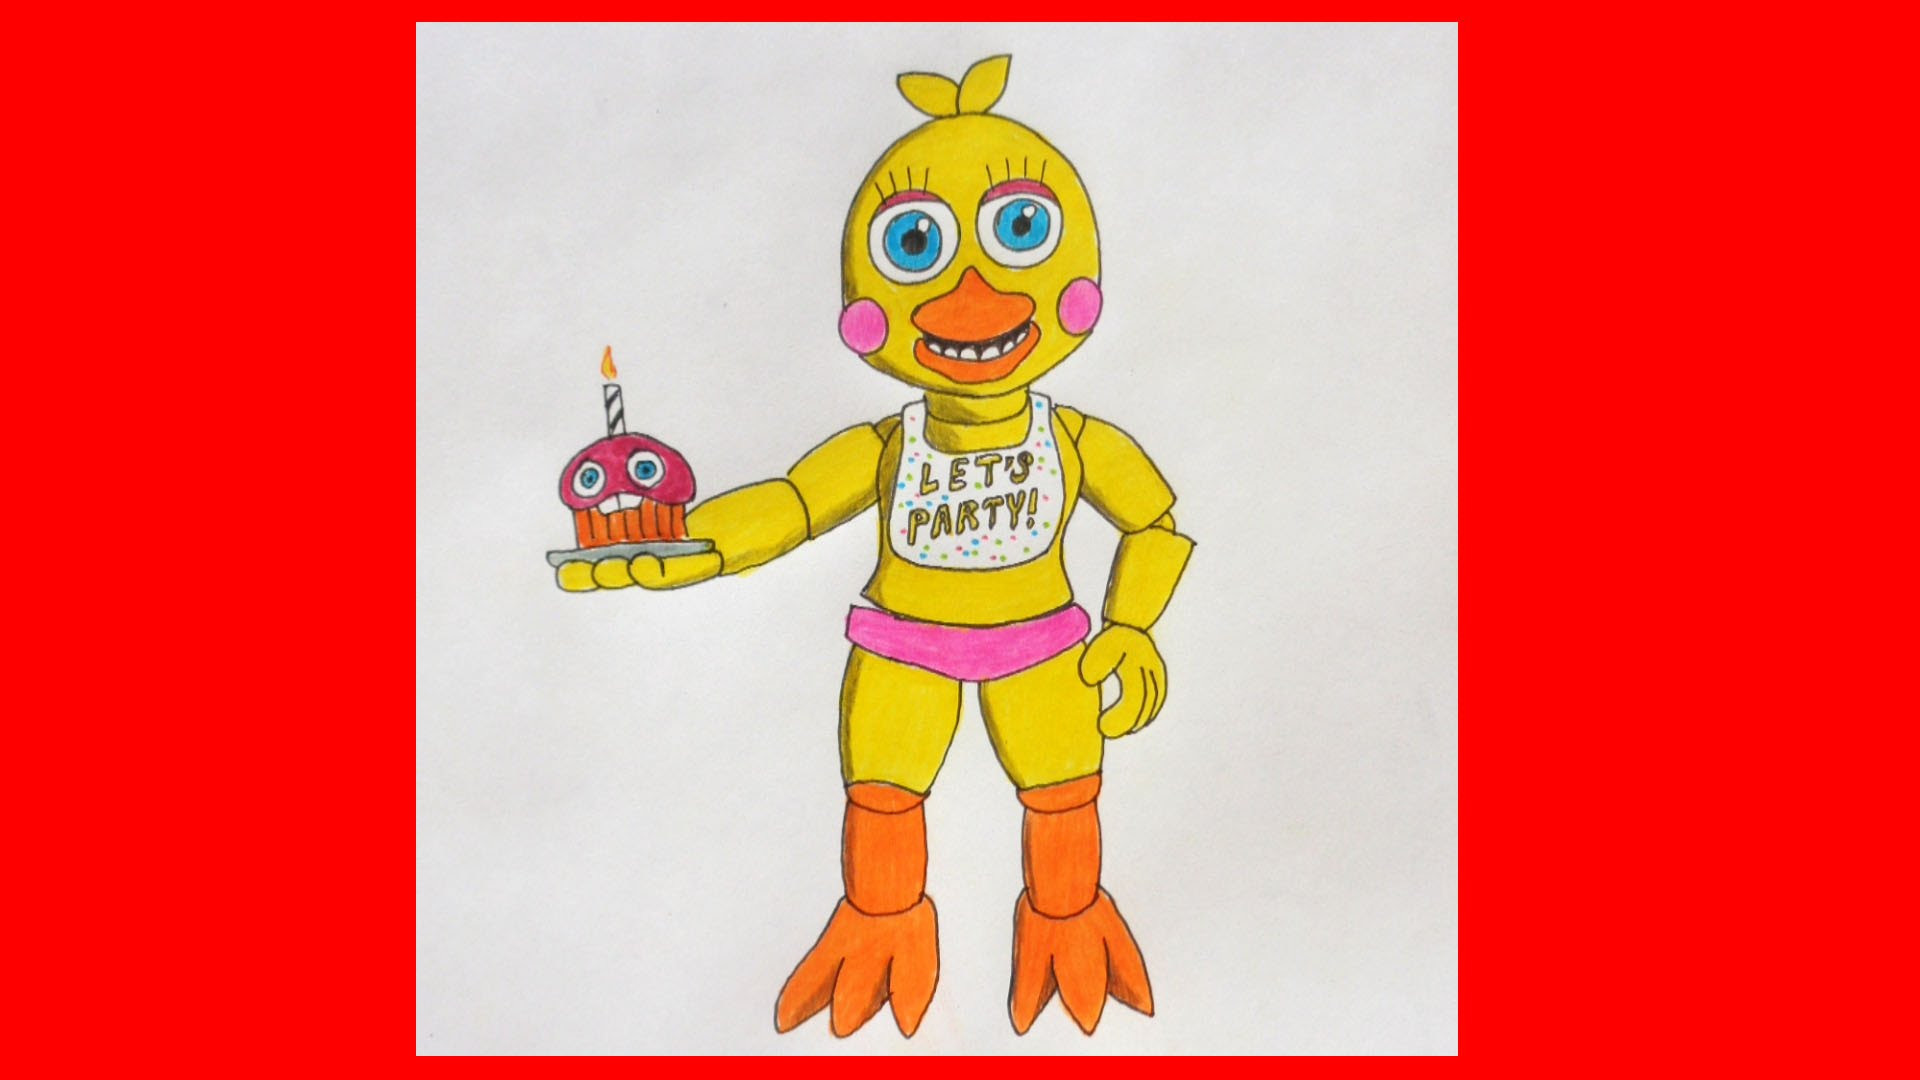 1920x1080 How To Draw Fnaf Toy Chica How To Draw Adventure Toy Chica, Five Nights At